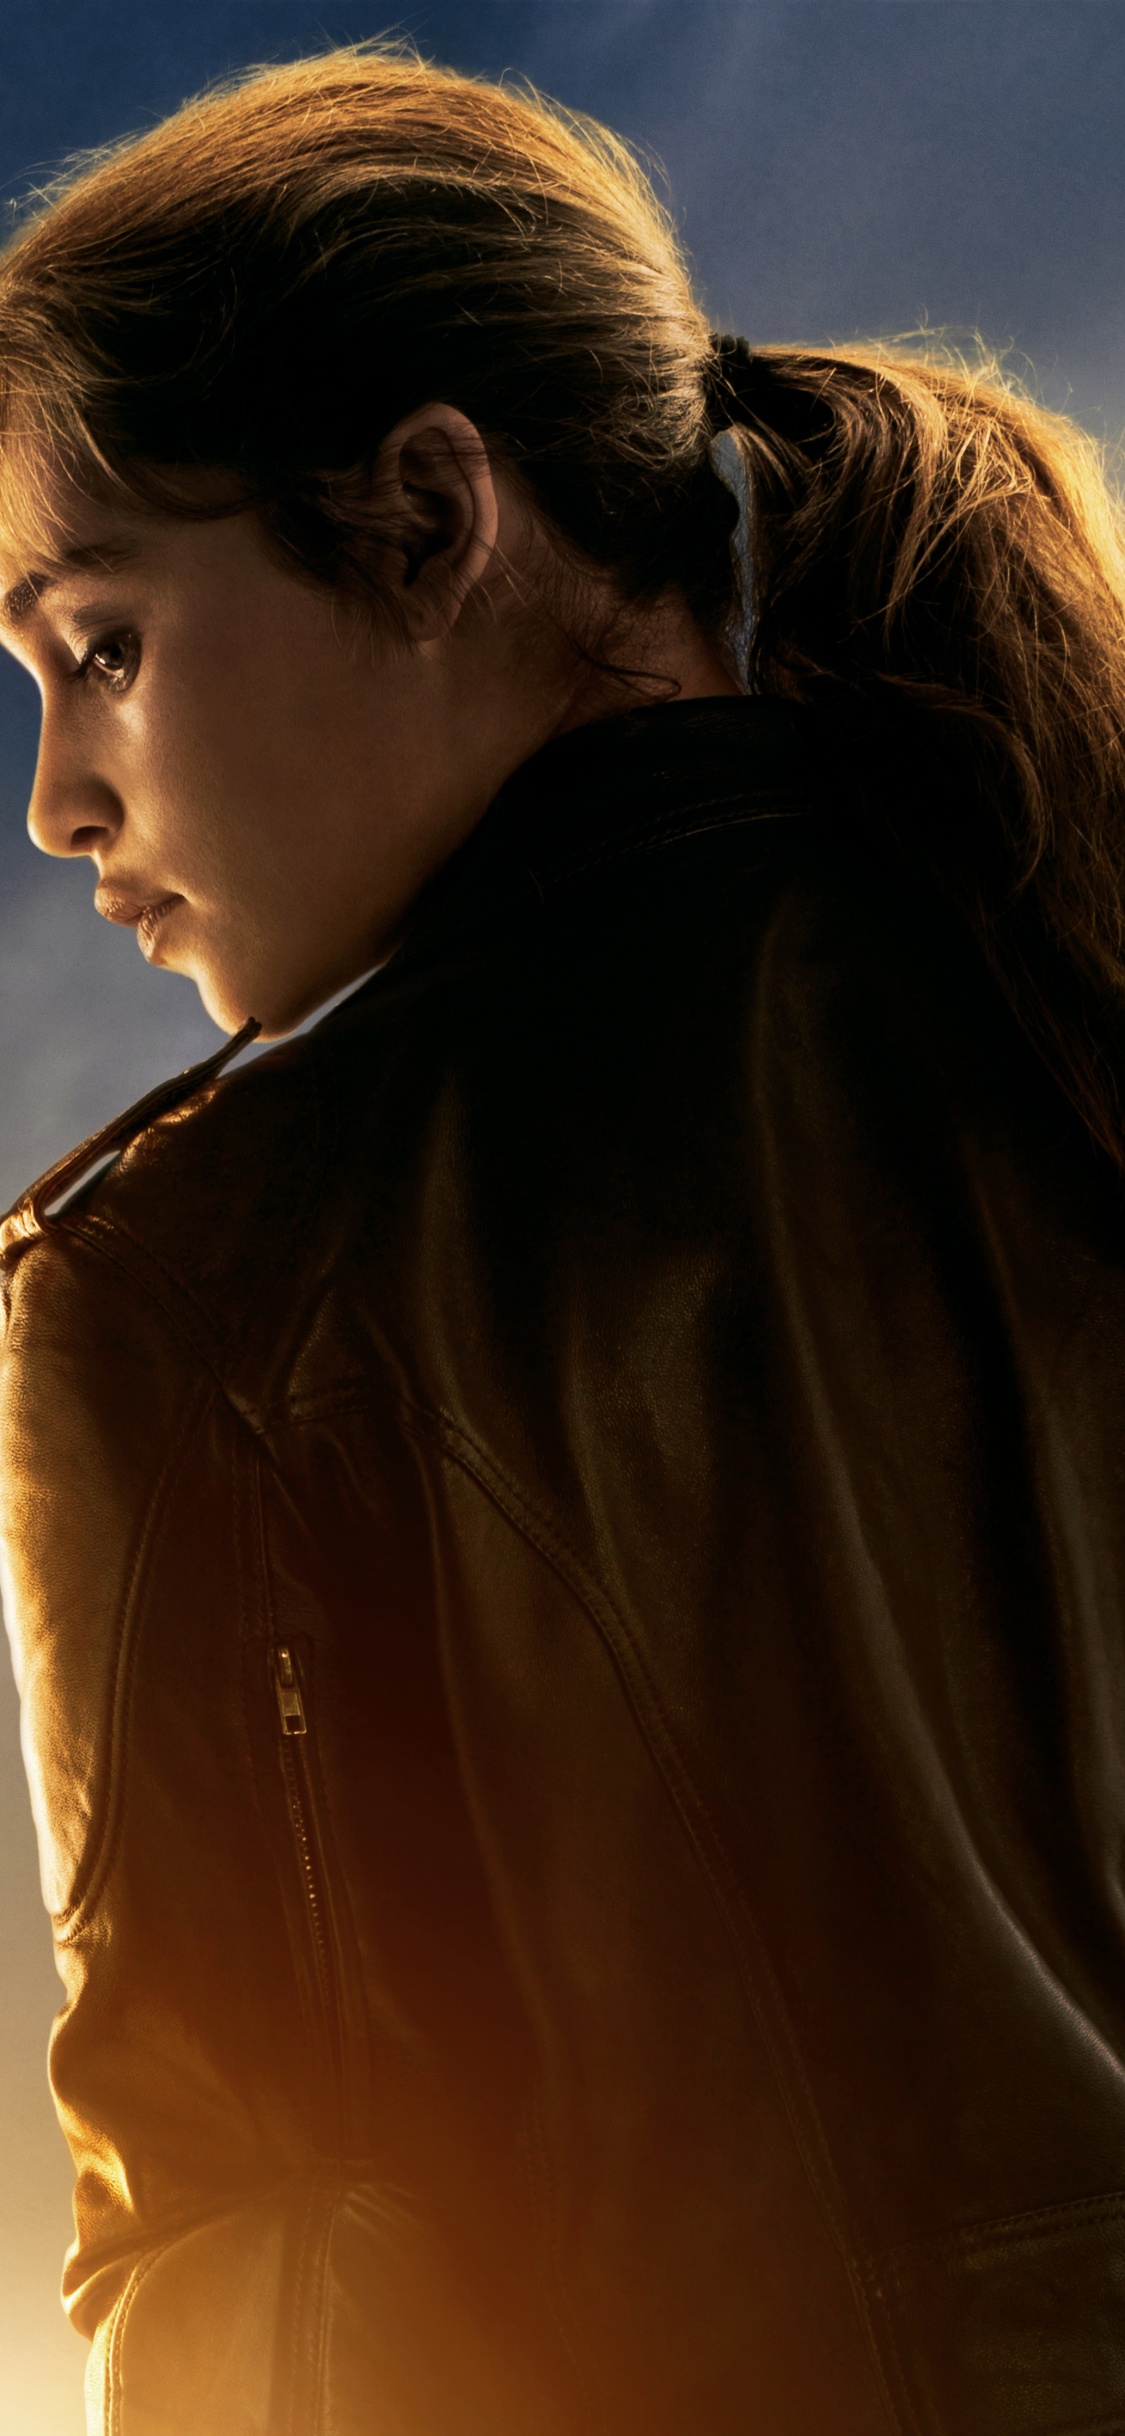 Woman in Brown Leather Jacket Under Cloudy Sky During Daytime. Wallpaper in 1125x2436 Resolution